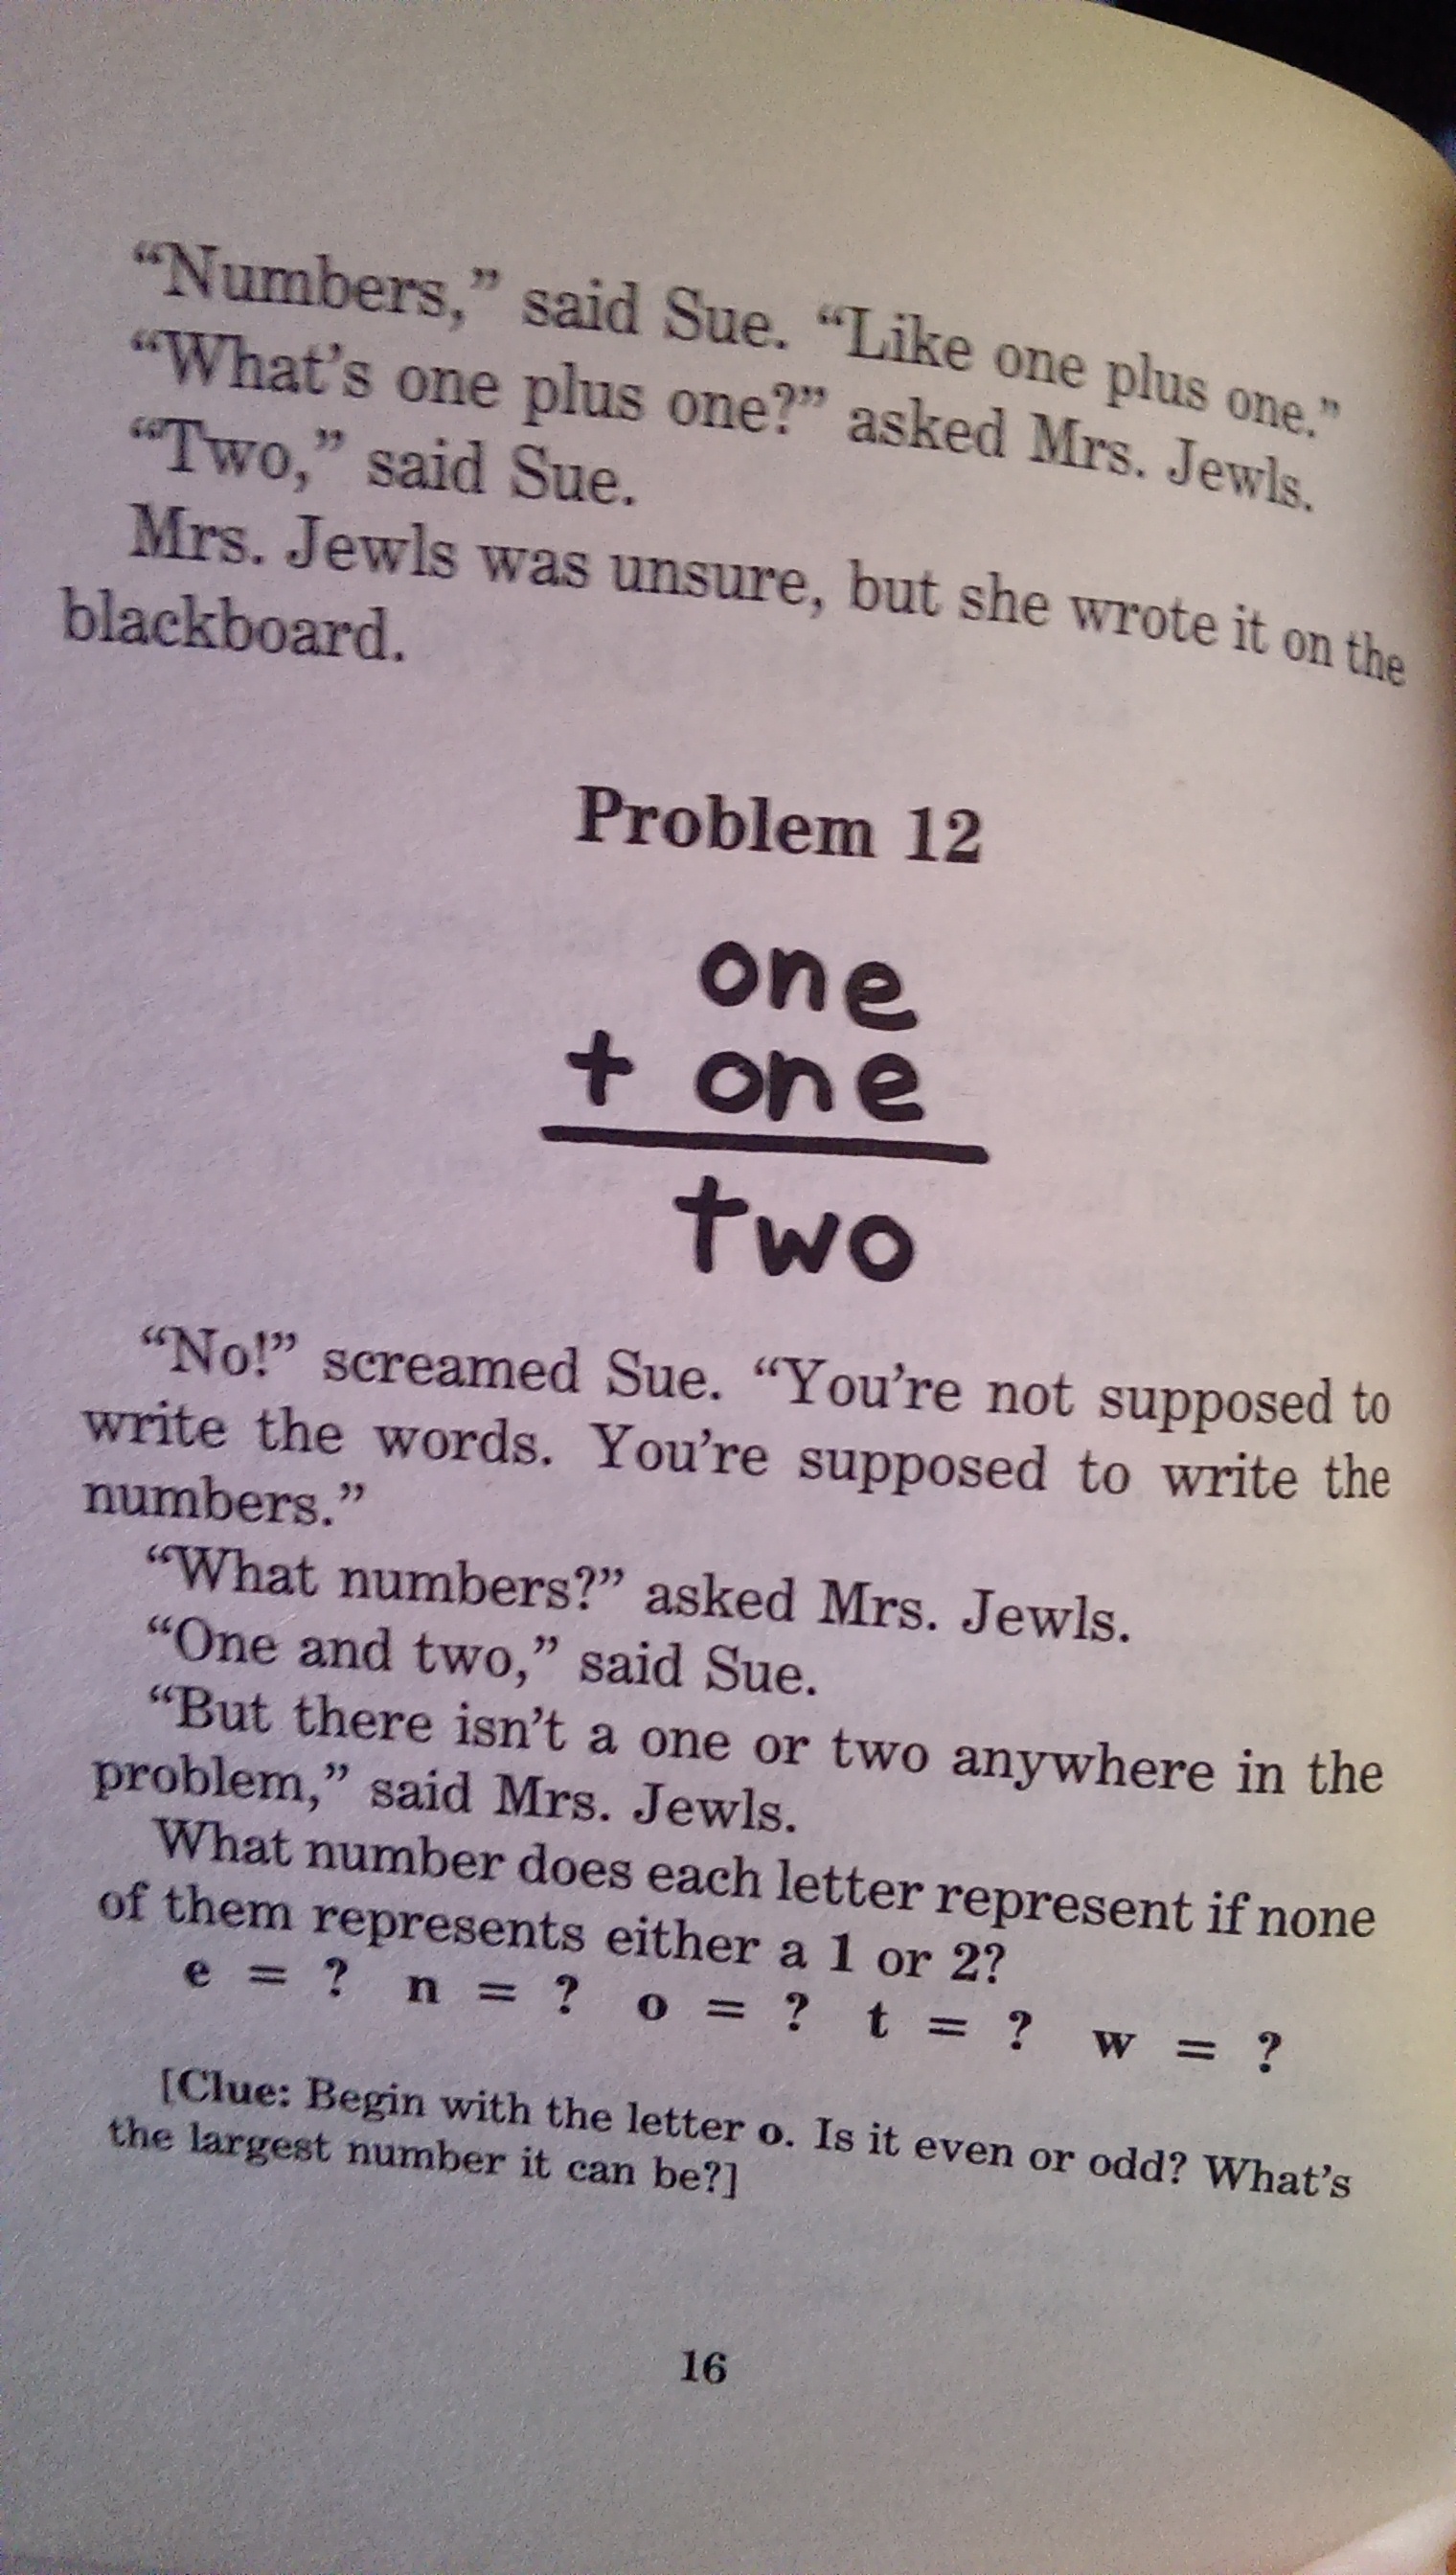 More sideways arithmetic from Wayside school and stranger in my